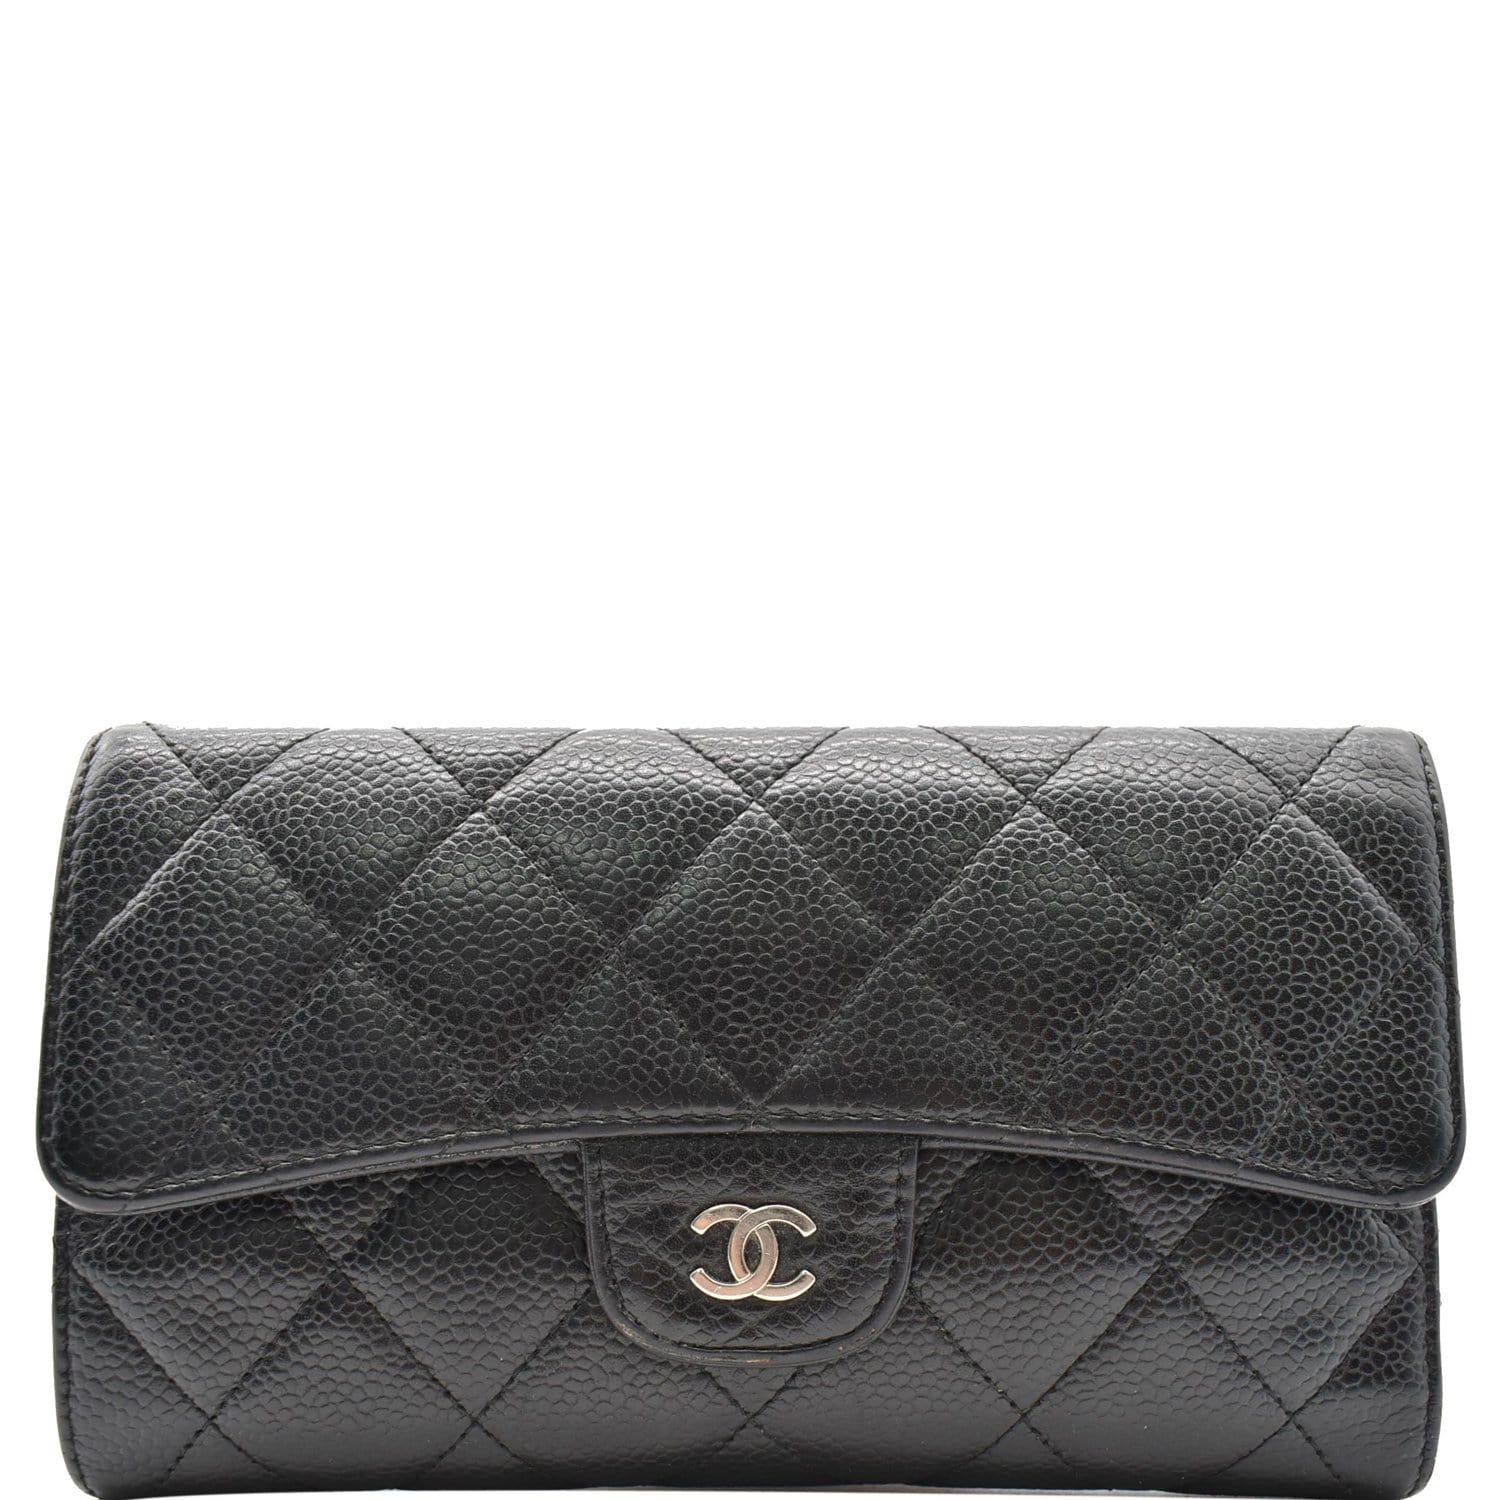 Vintage Chanel Quilted Trifold Wallet Made in France. 